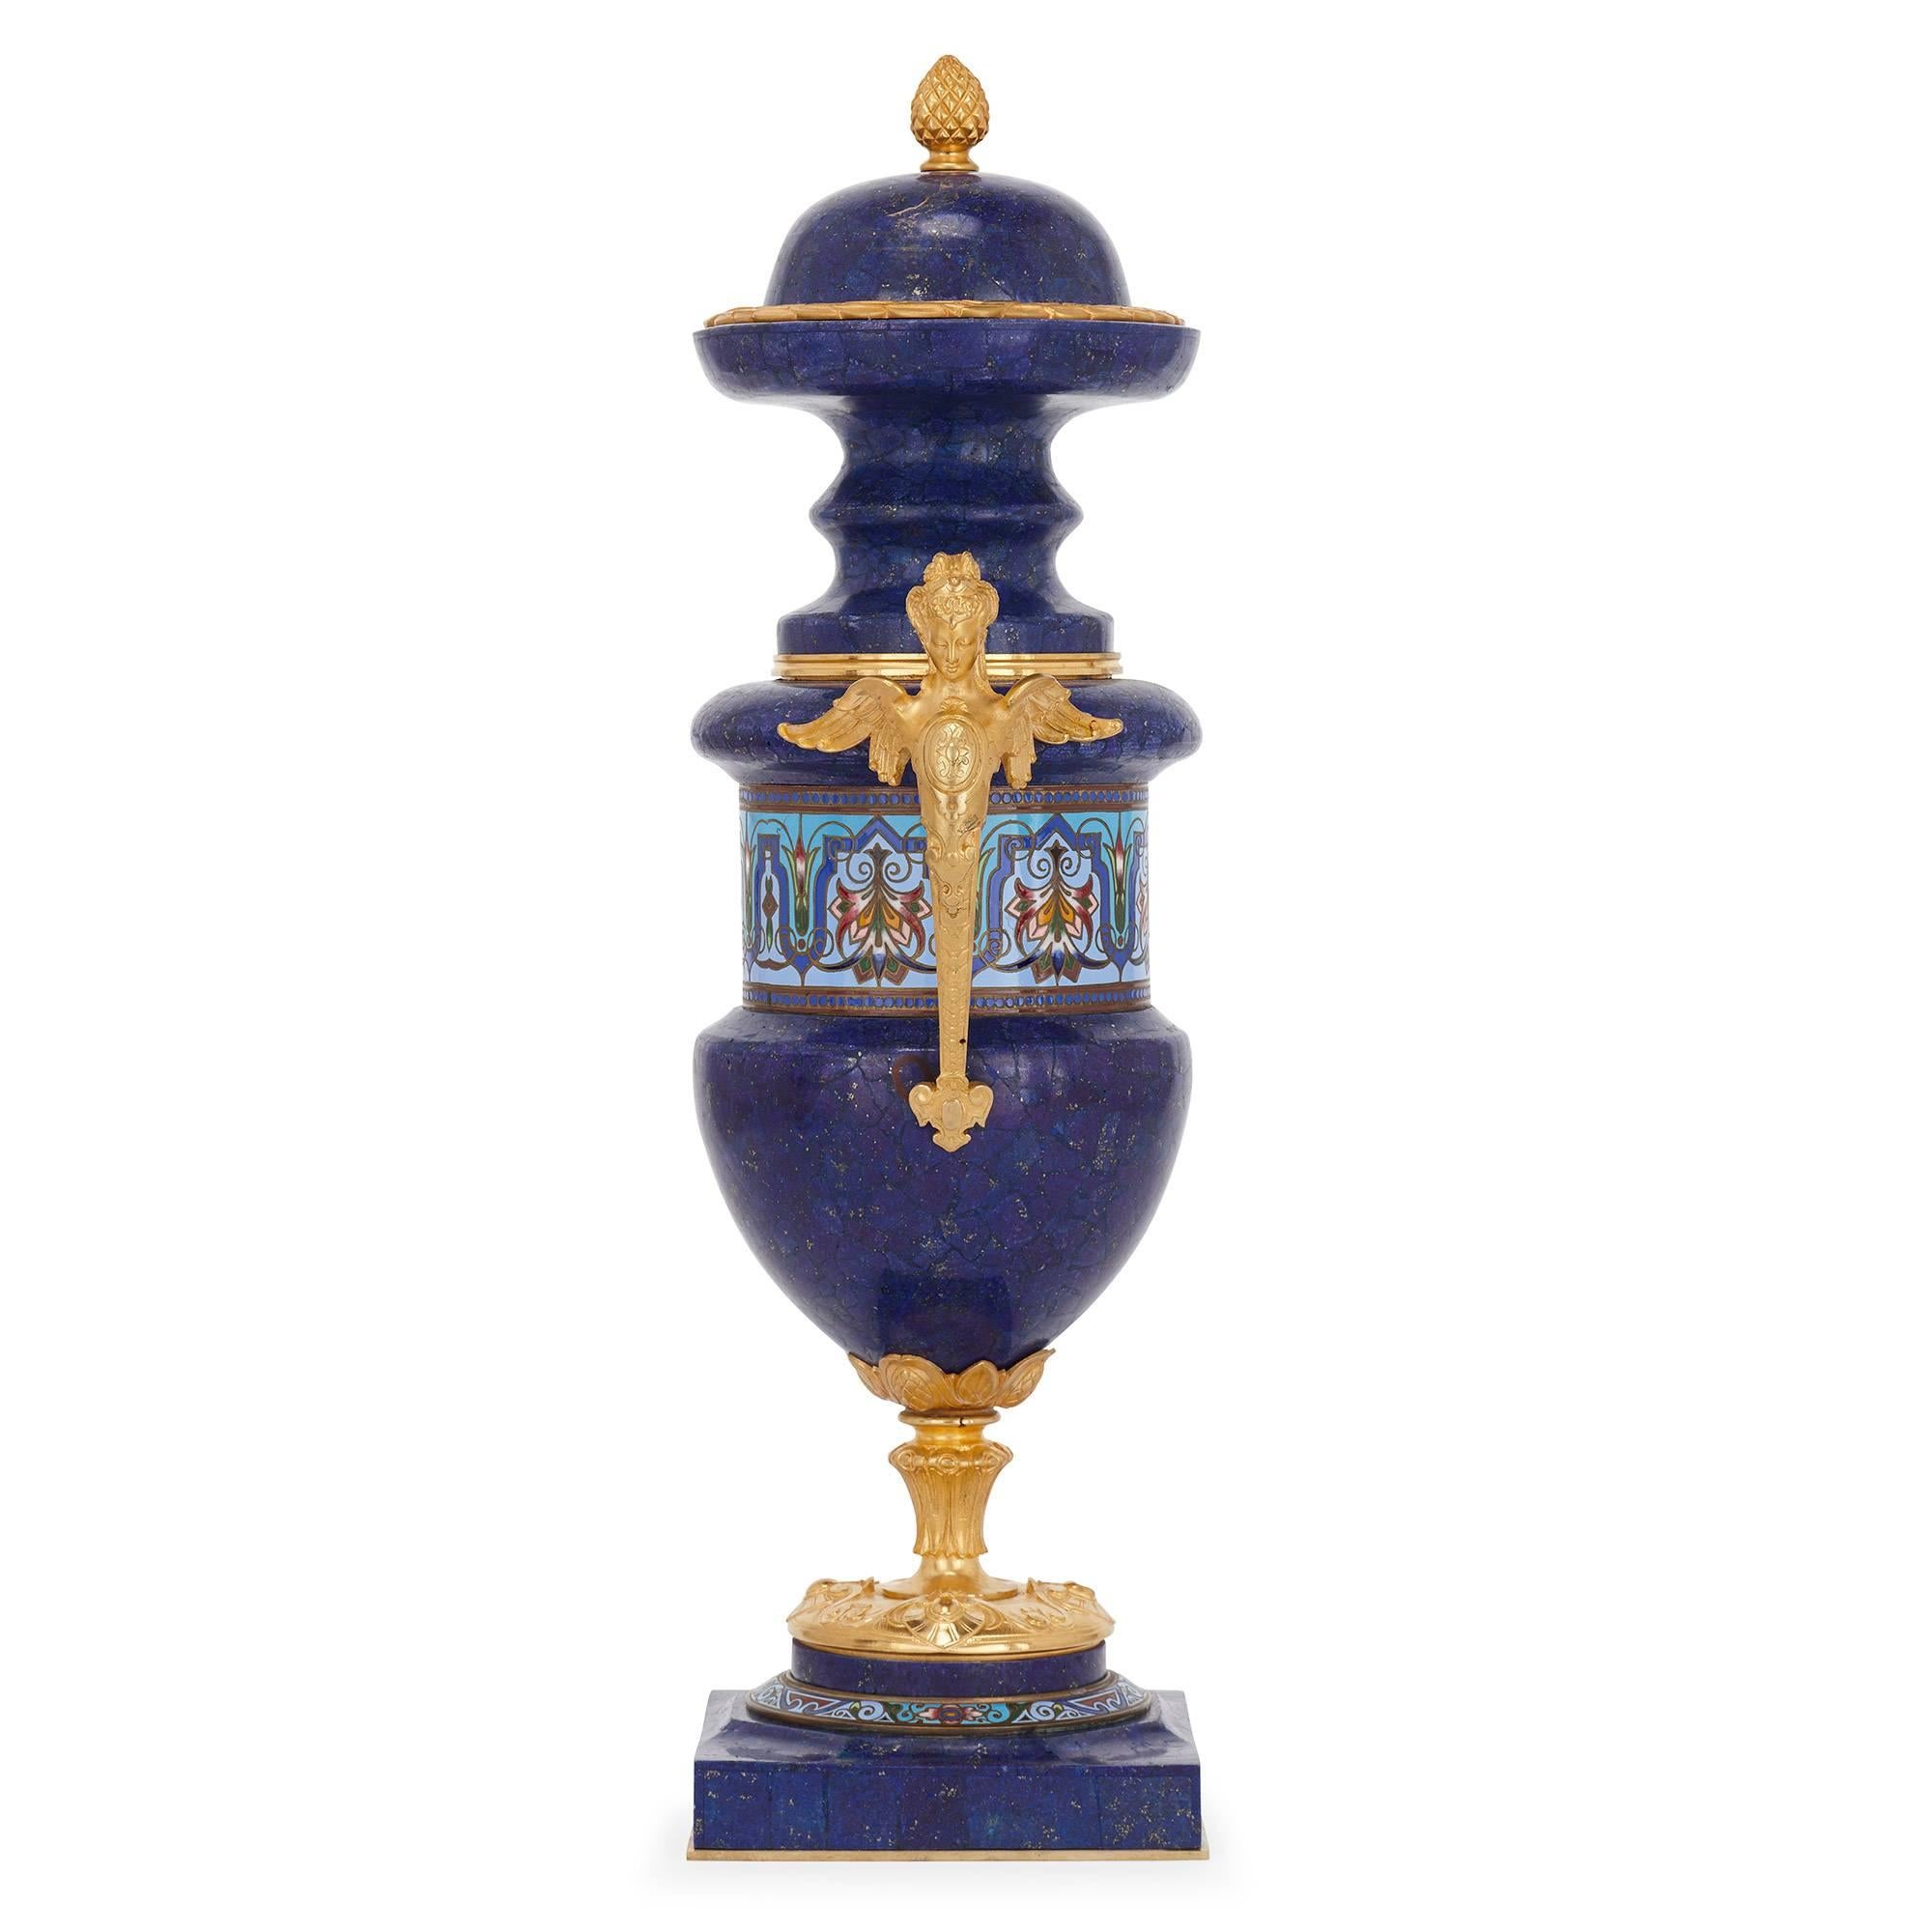 These exquisite neoclassical style vases are crafted from precious lapis lazuli, a gemstone highly prized since ancient times on account of its vibrant blue coloring and rarity. The present antique vases are further embellished with champlevé enamel